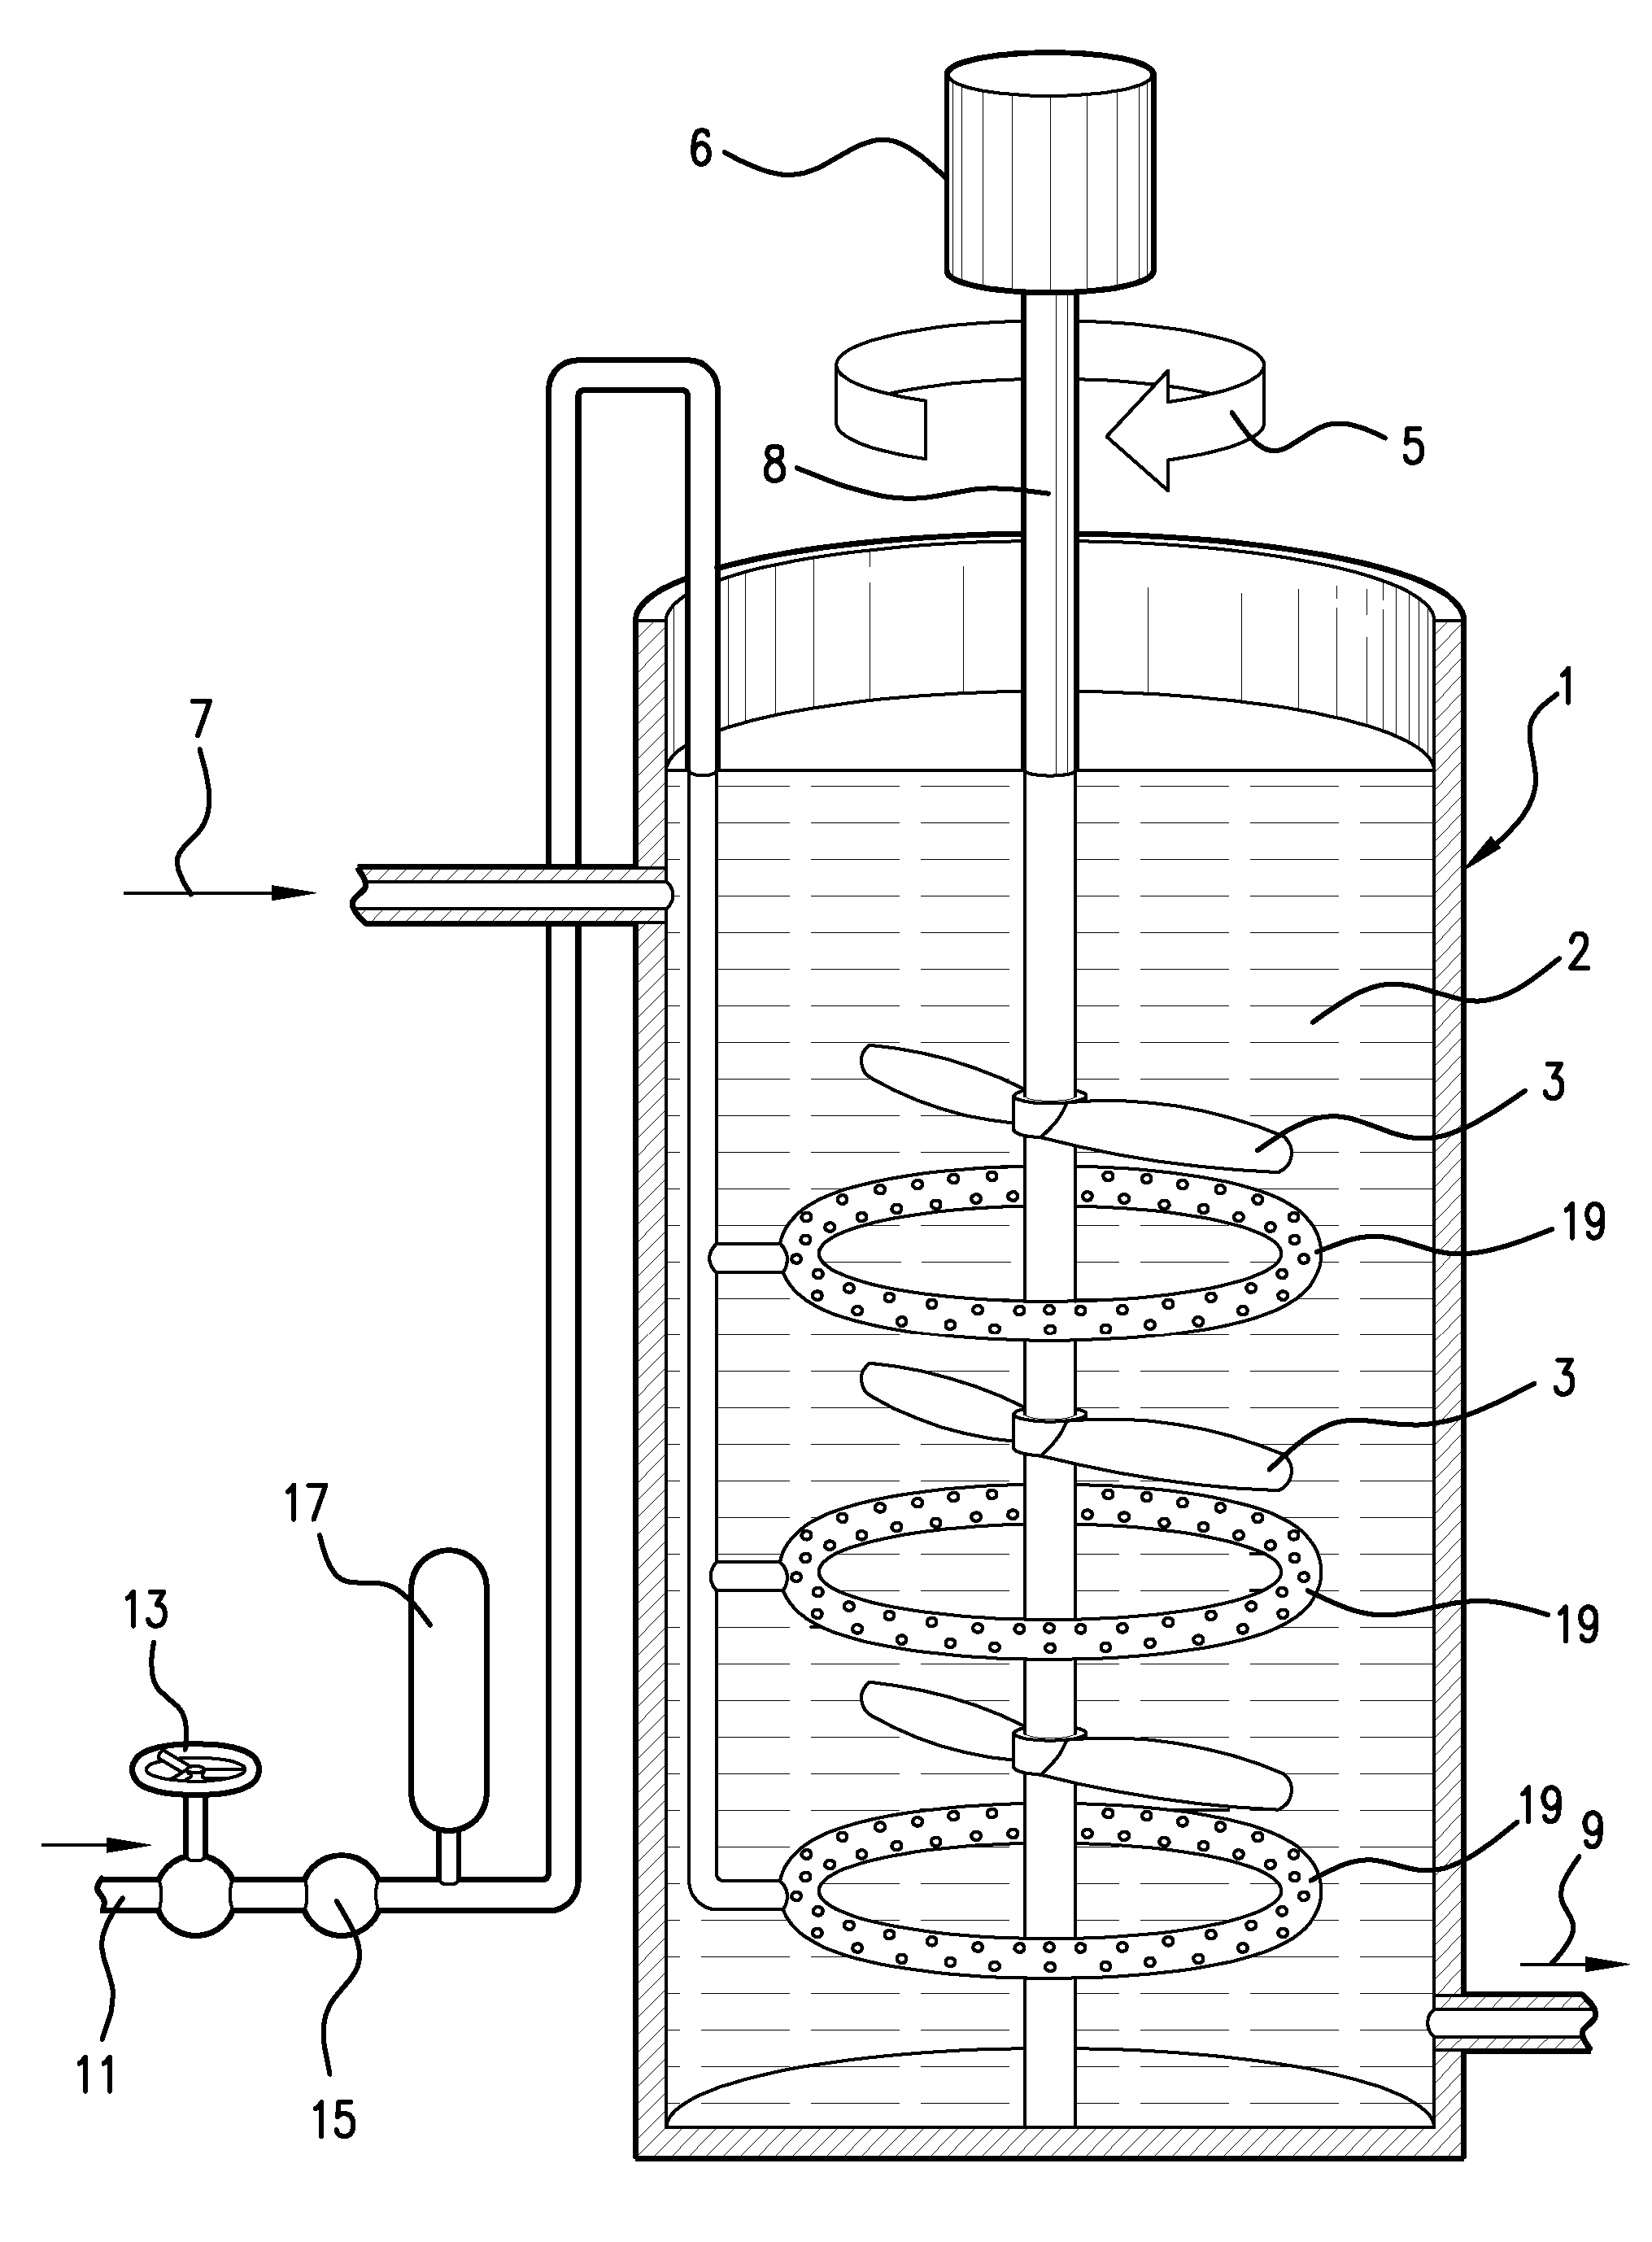 Use of pure oxygen in viscous fermentation processes